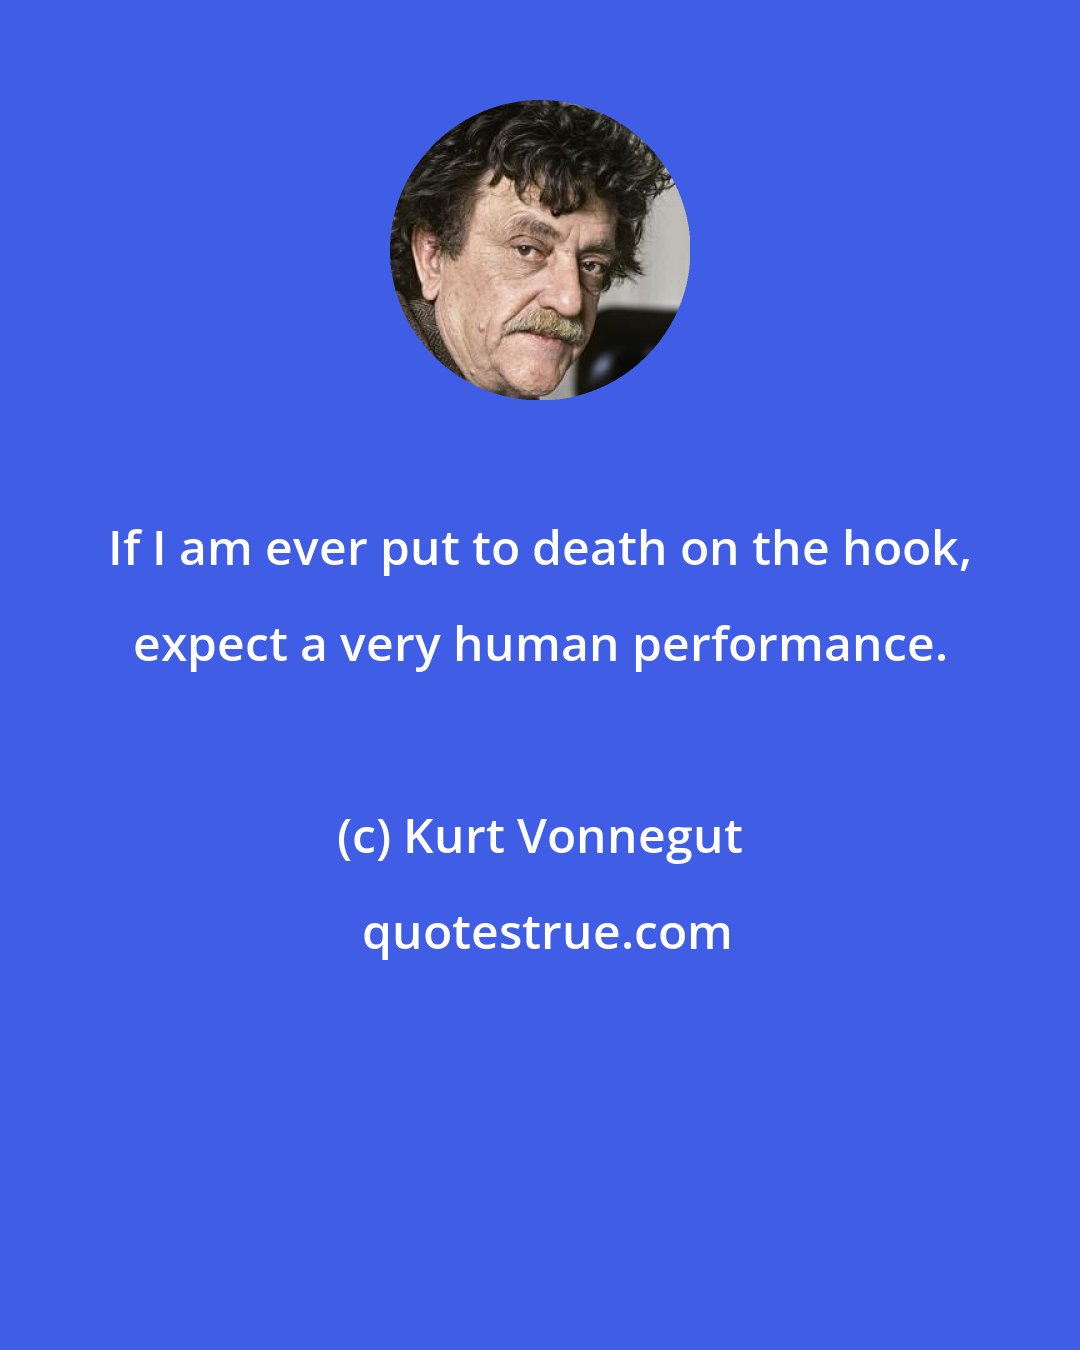 Kurt Vonnegut: If I am ever put to death on the hook, expect a very human performance.